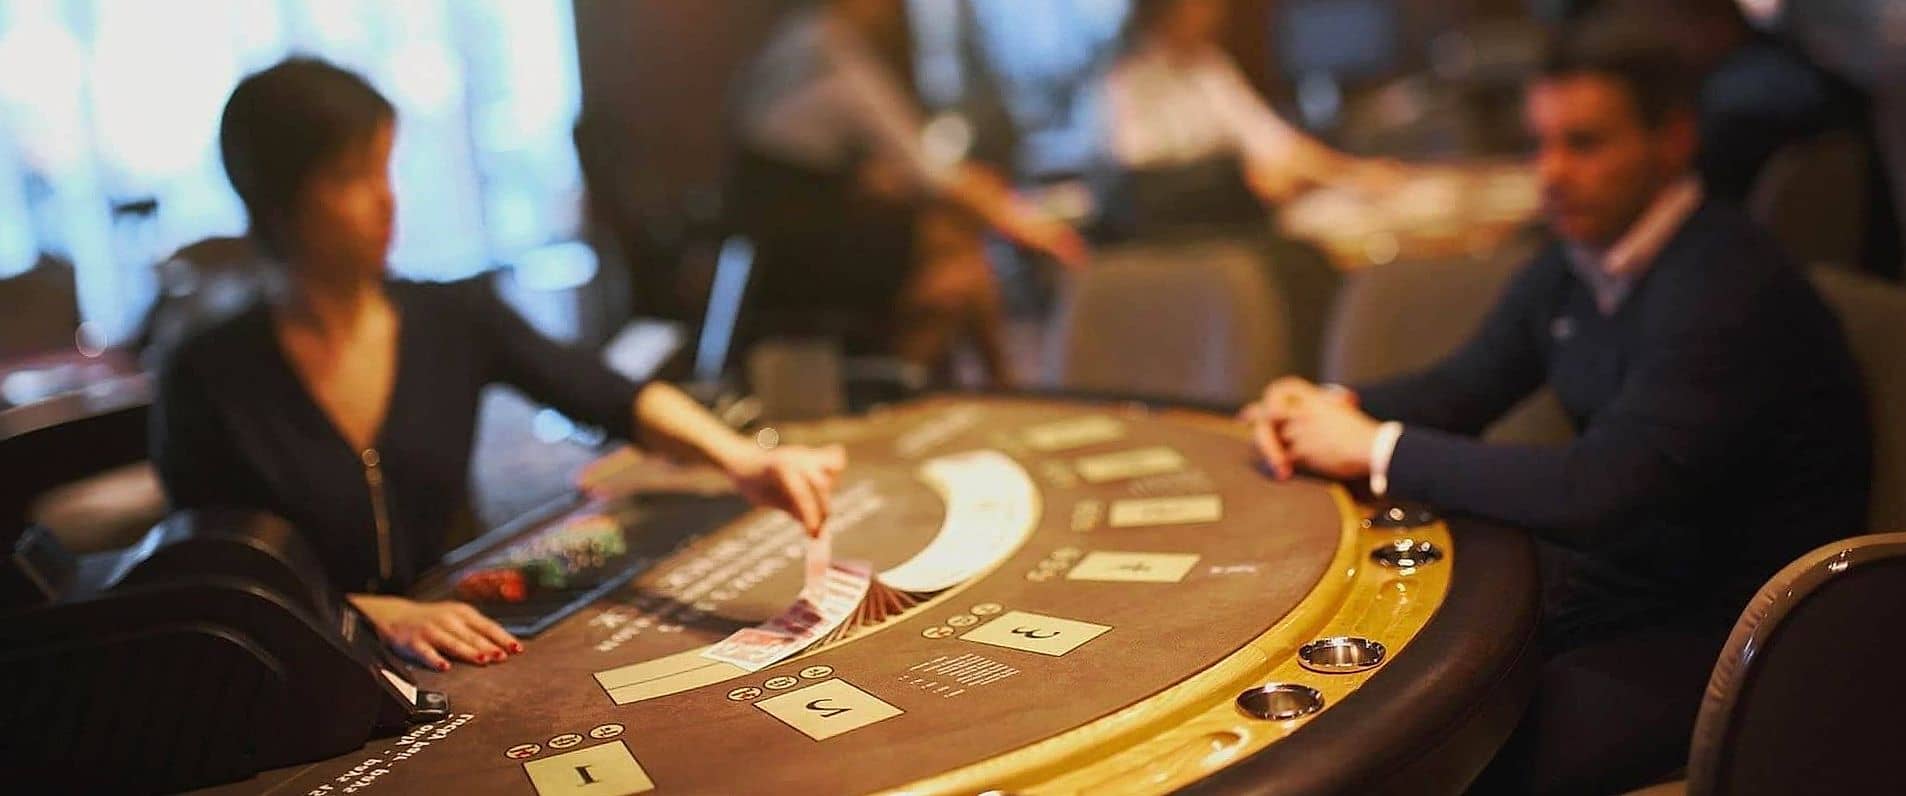 Blackjack Table: How to play and understand basic Blackjack rules